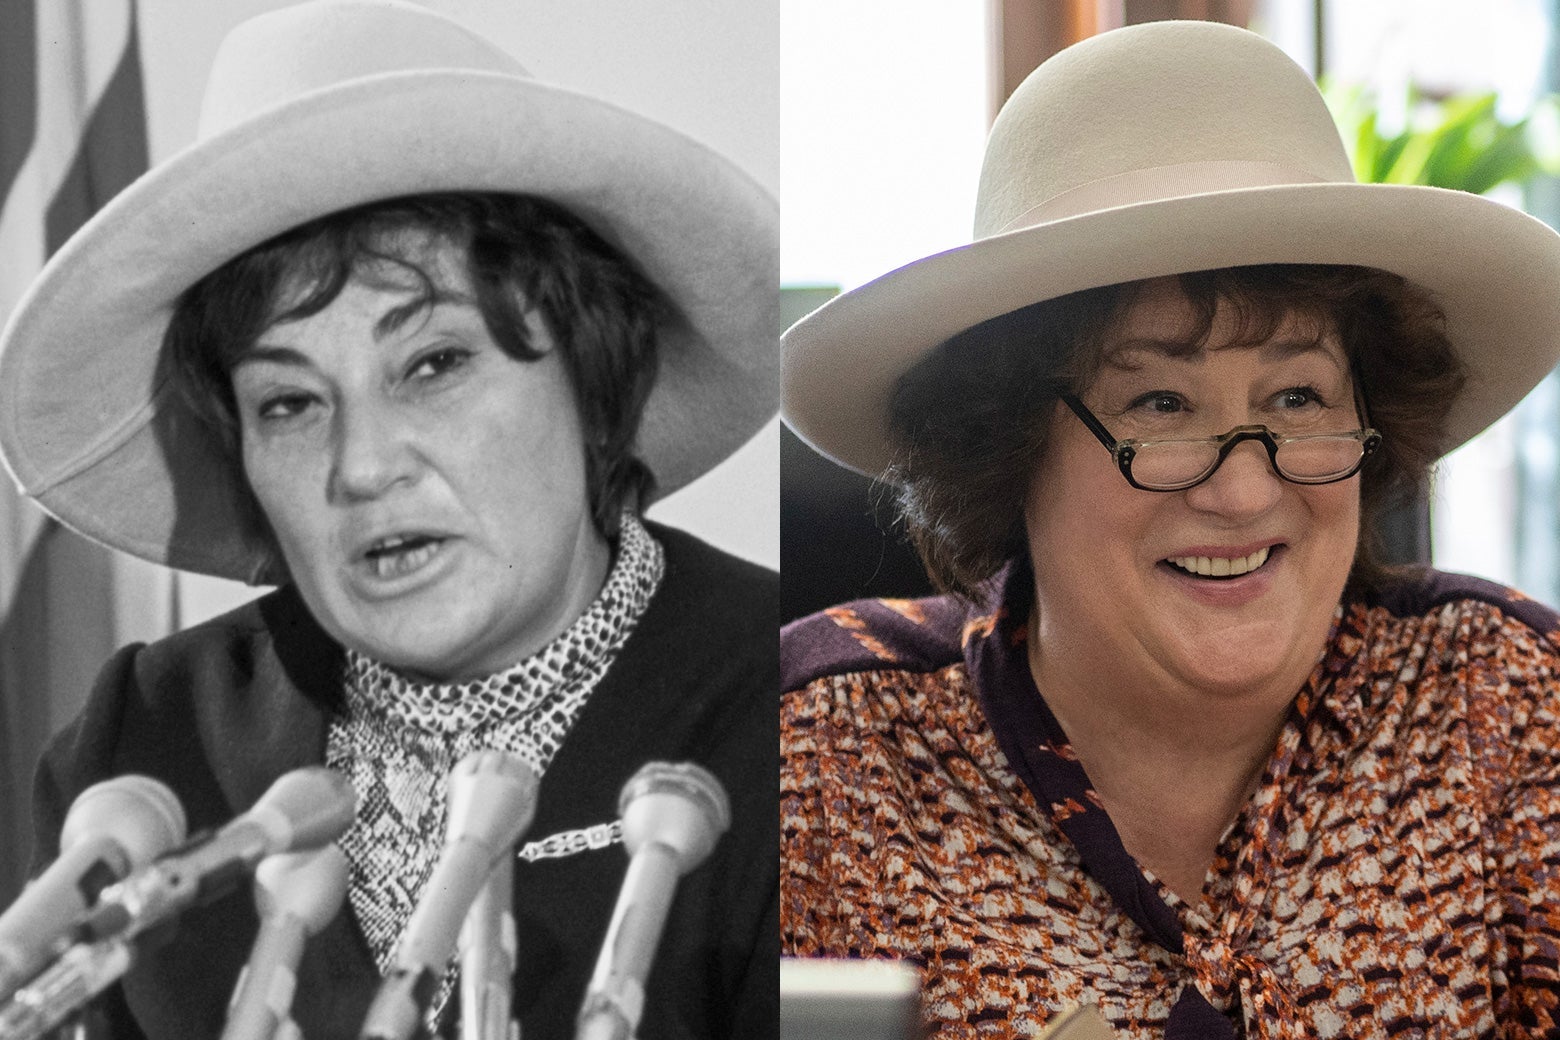 Side-by-side photos of Bella Abzug and Margo Martindale as Abzug